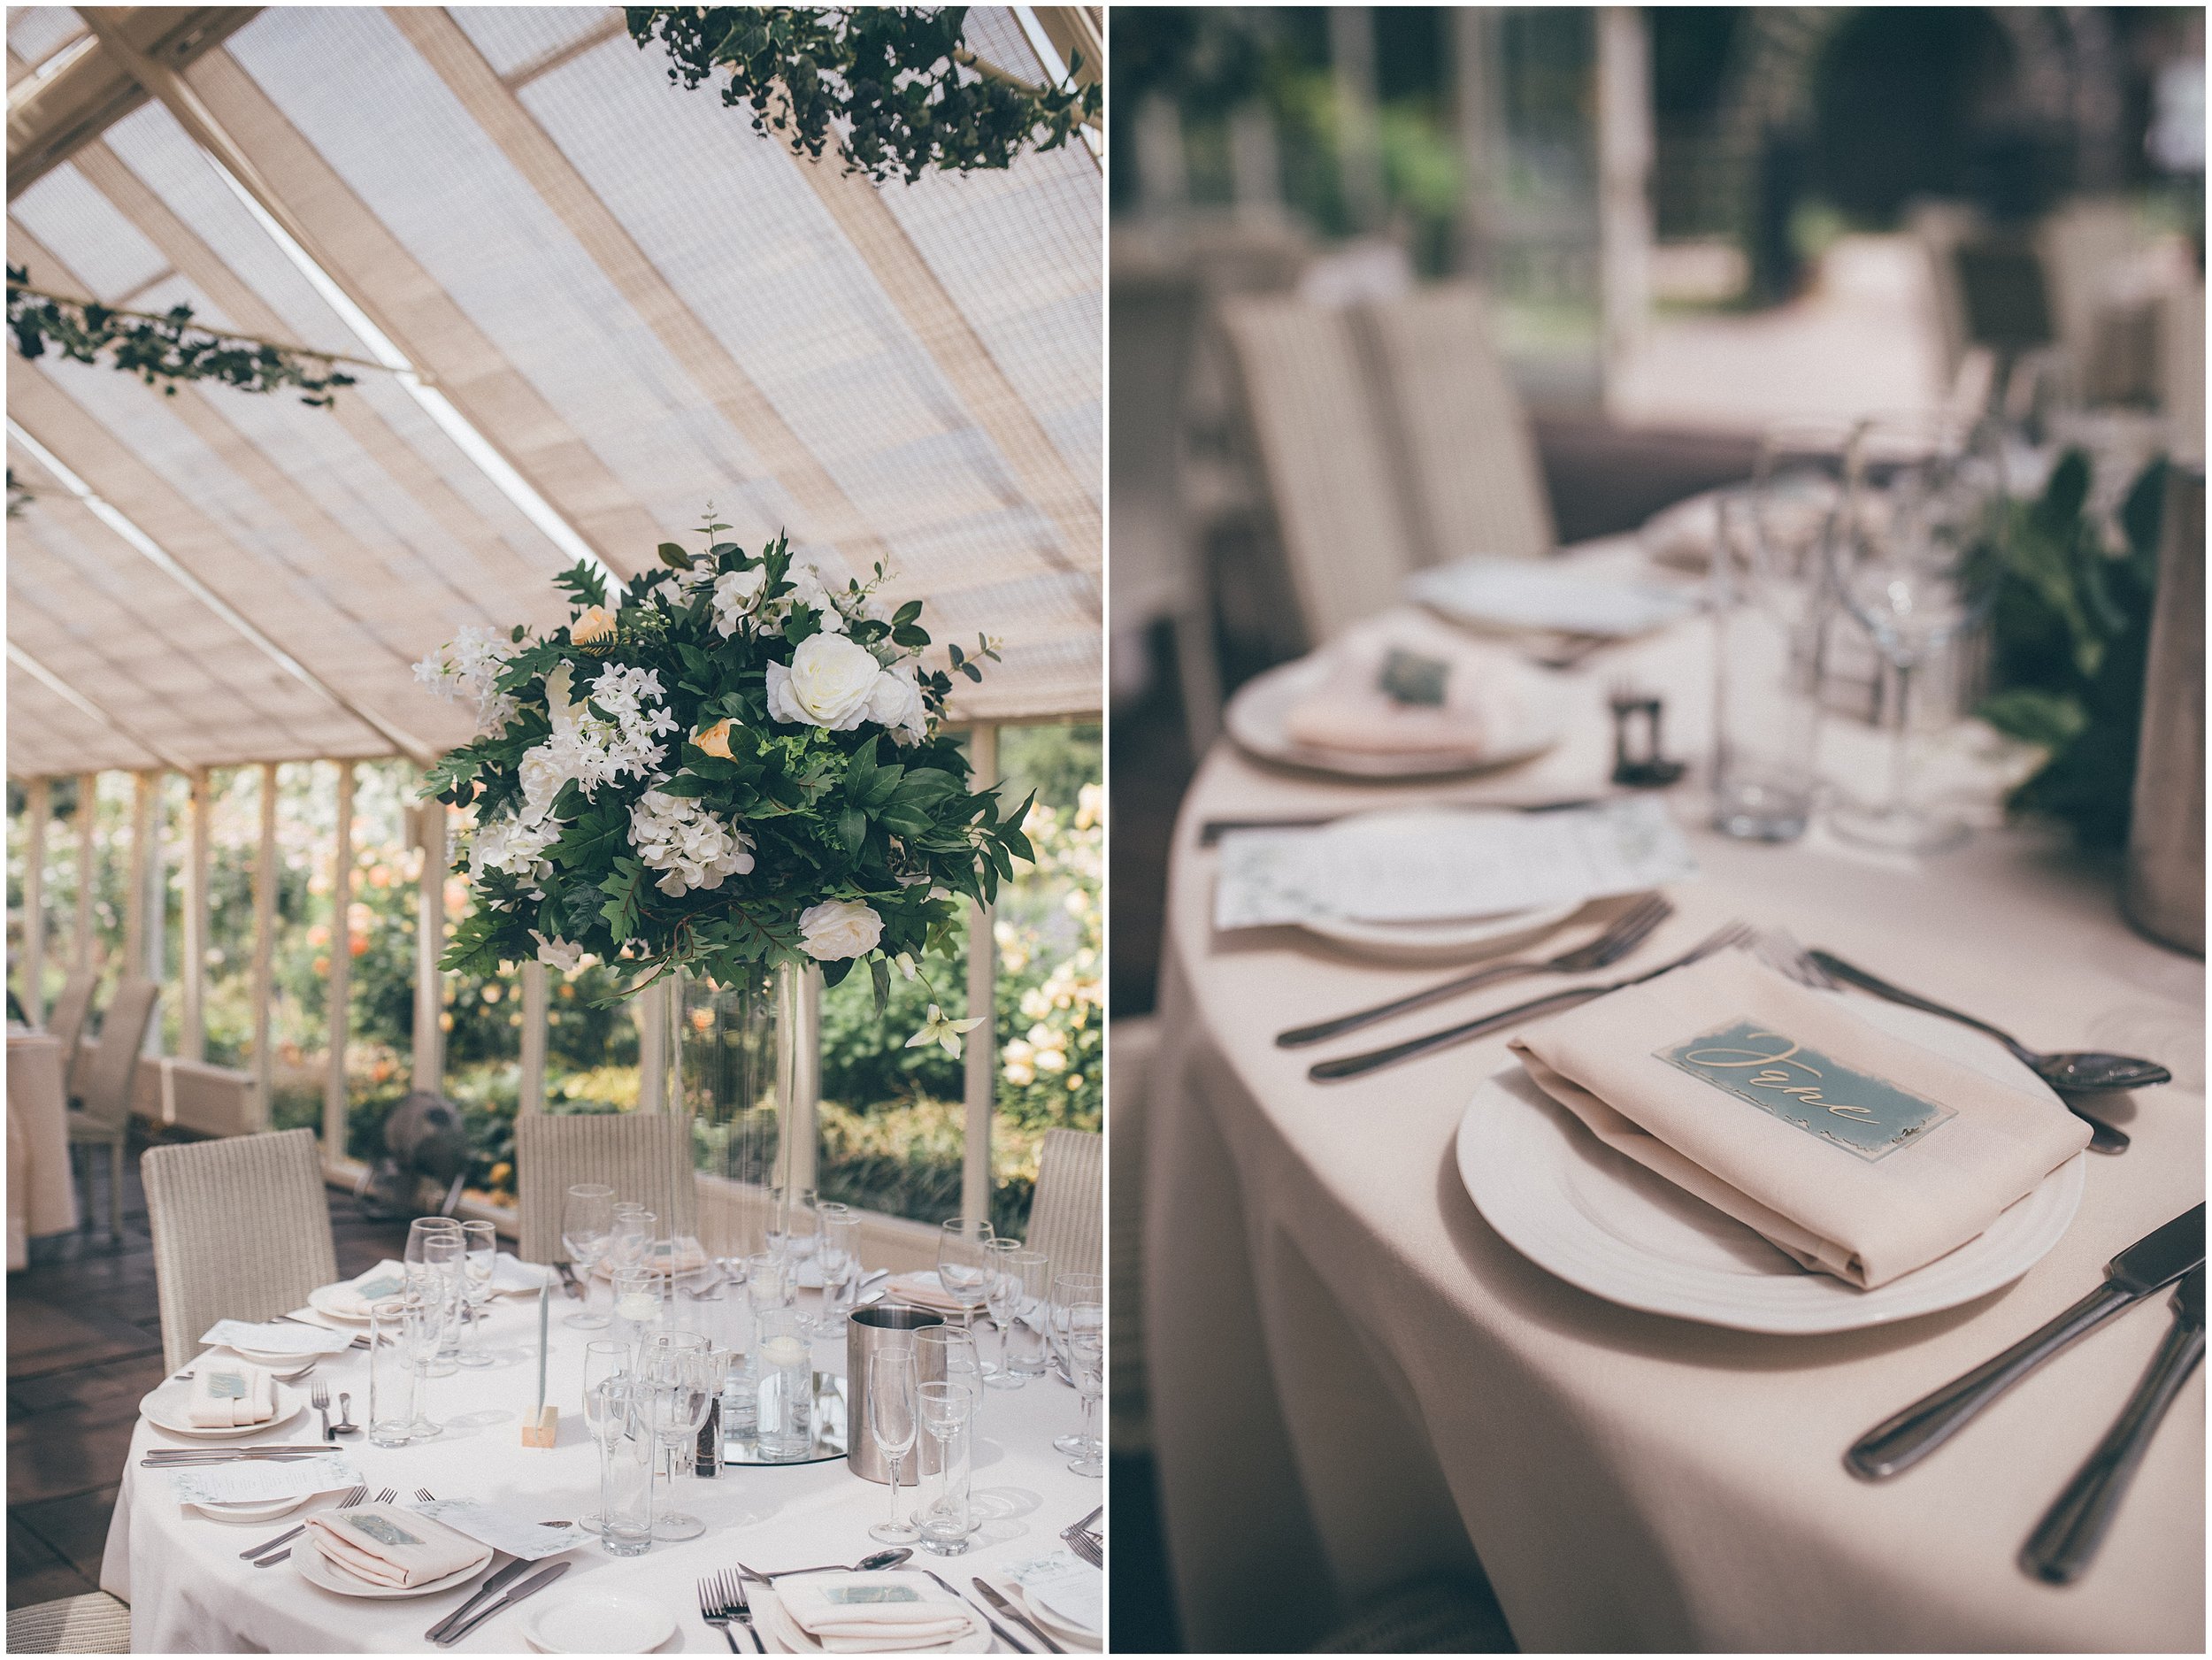 Beautiful and classic set-up at Abbeywood Estate conservatory for a summer wedding.